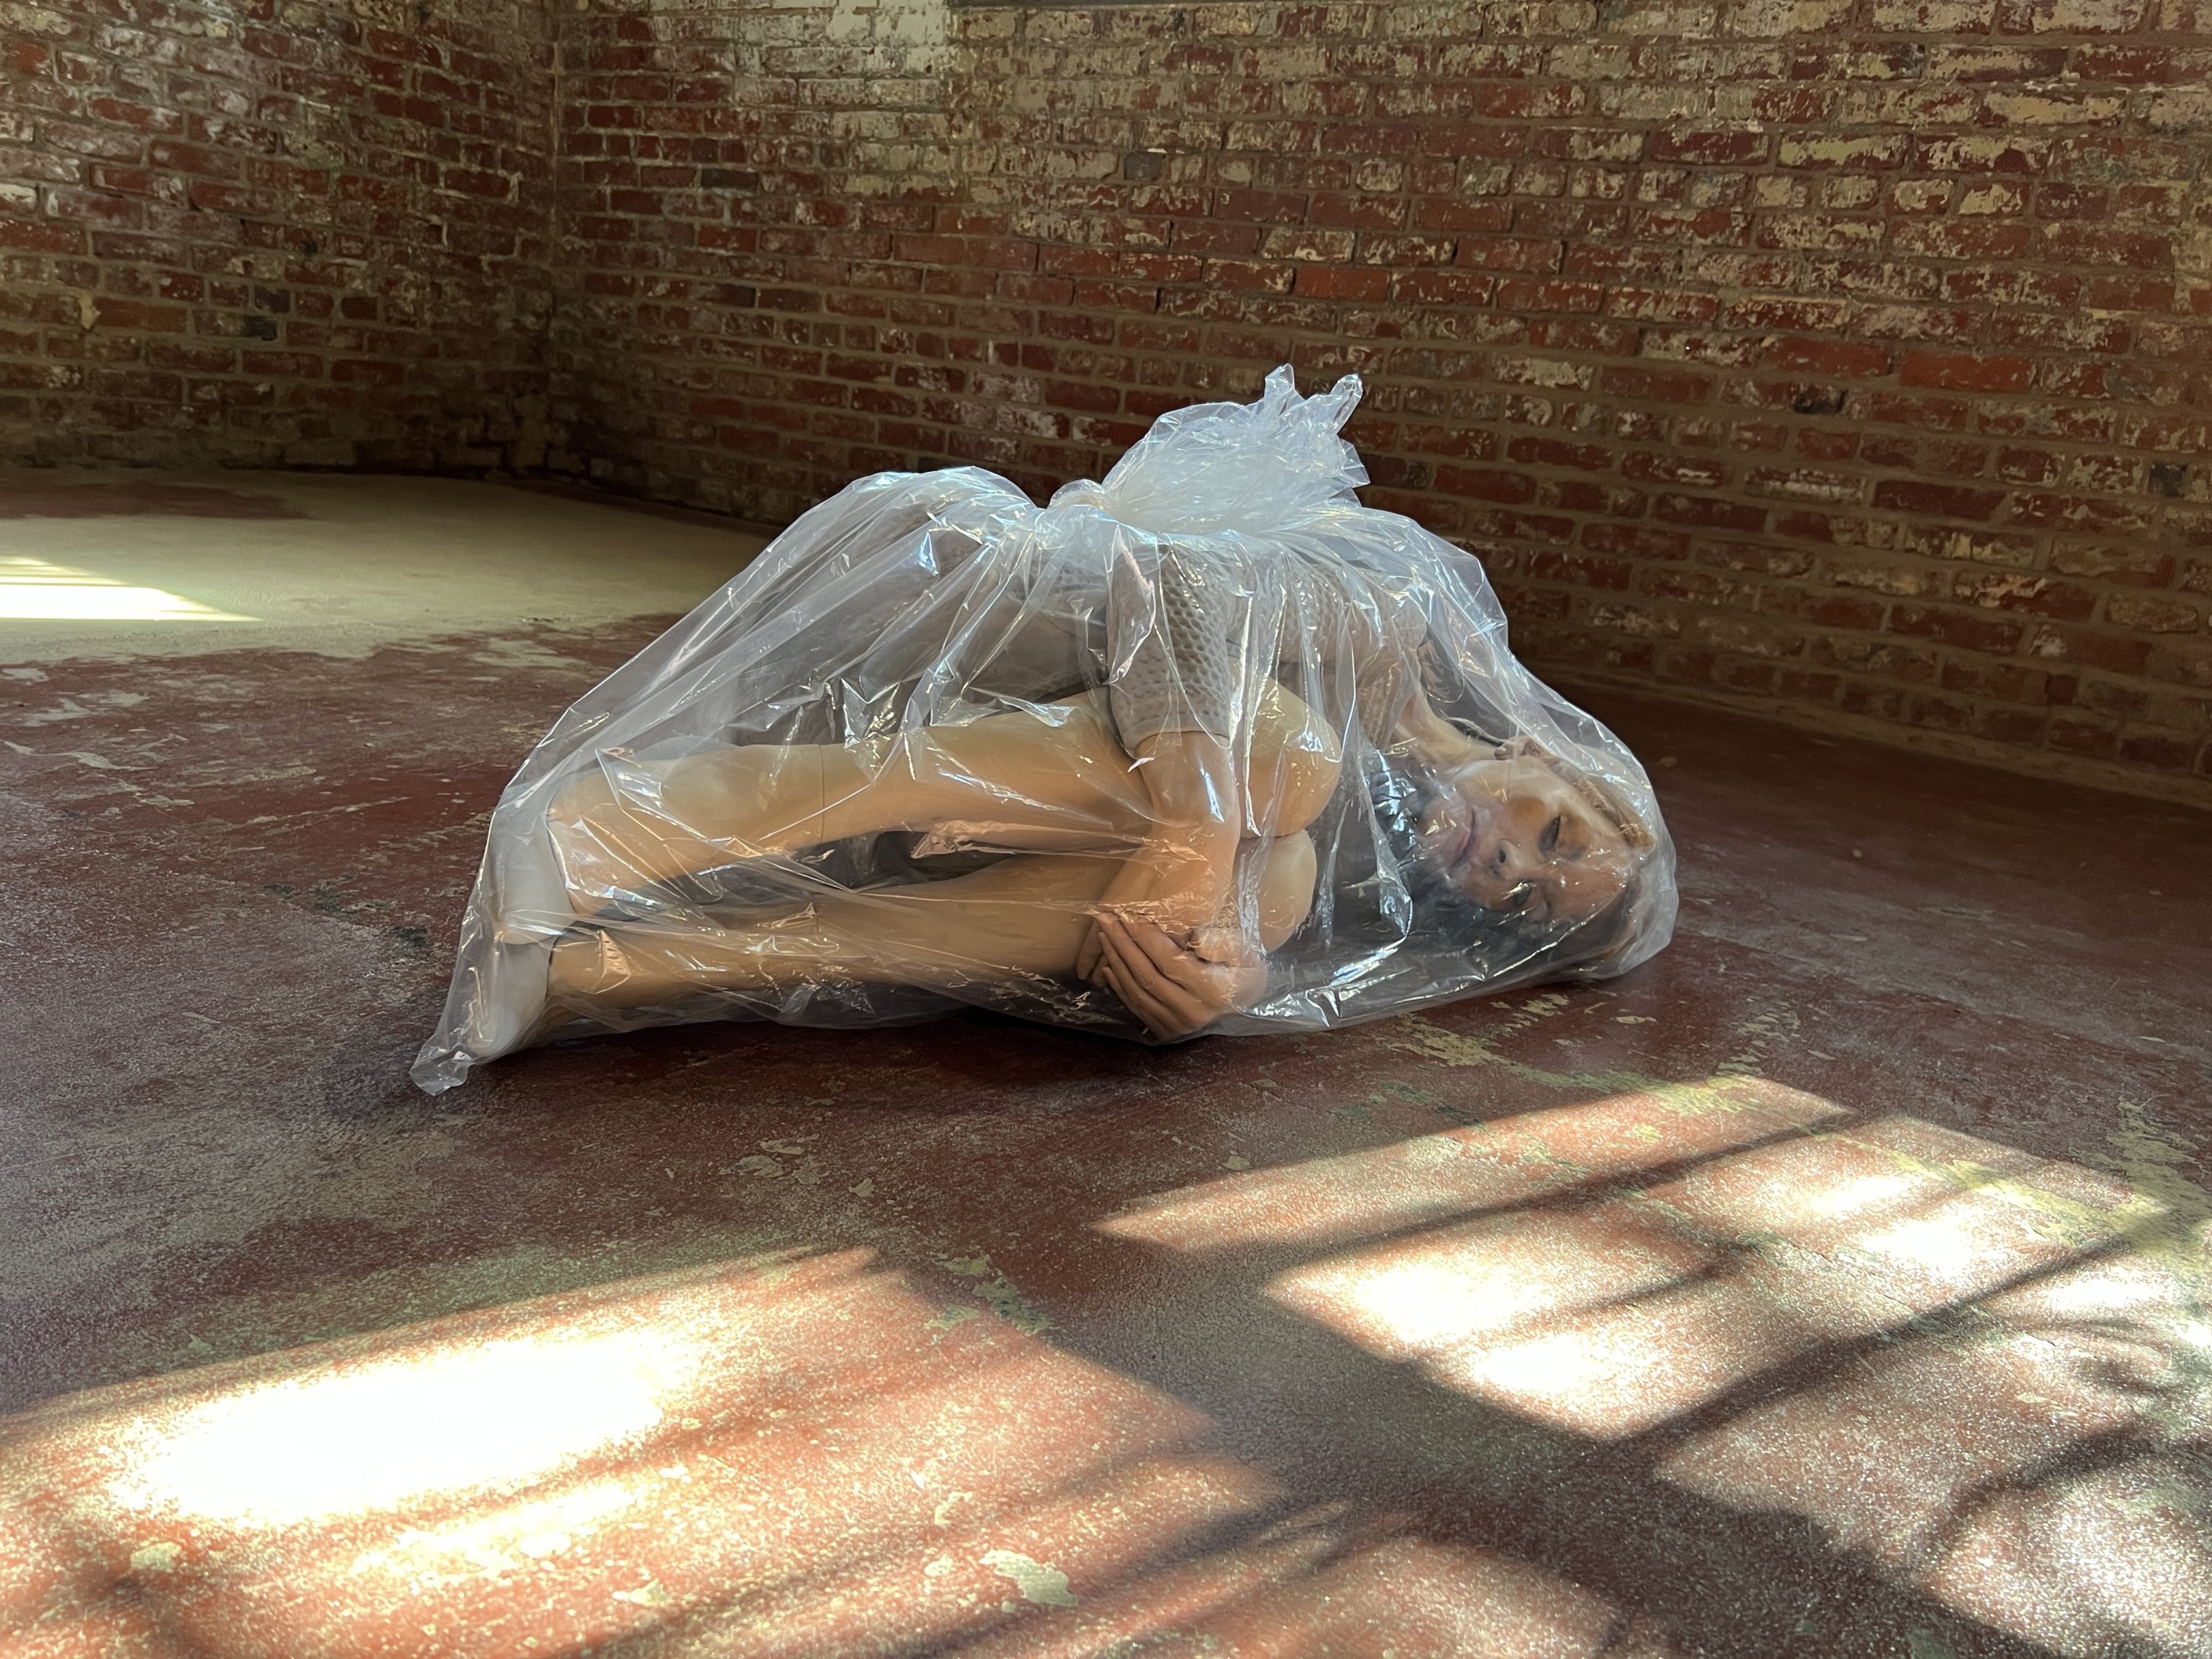 A plastic doll lays in the fetal position inside of a plastic garbage bag